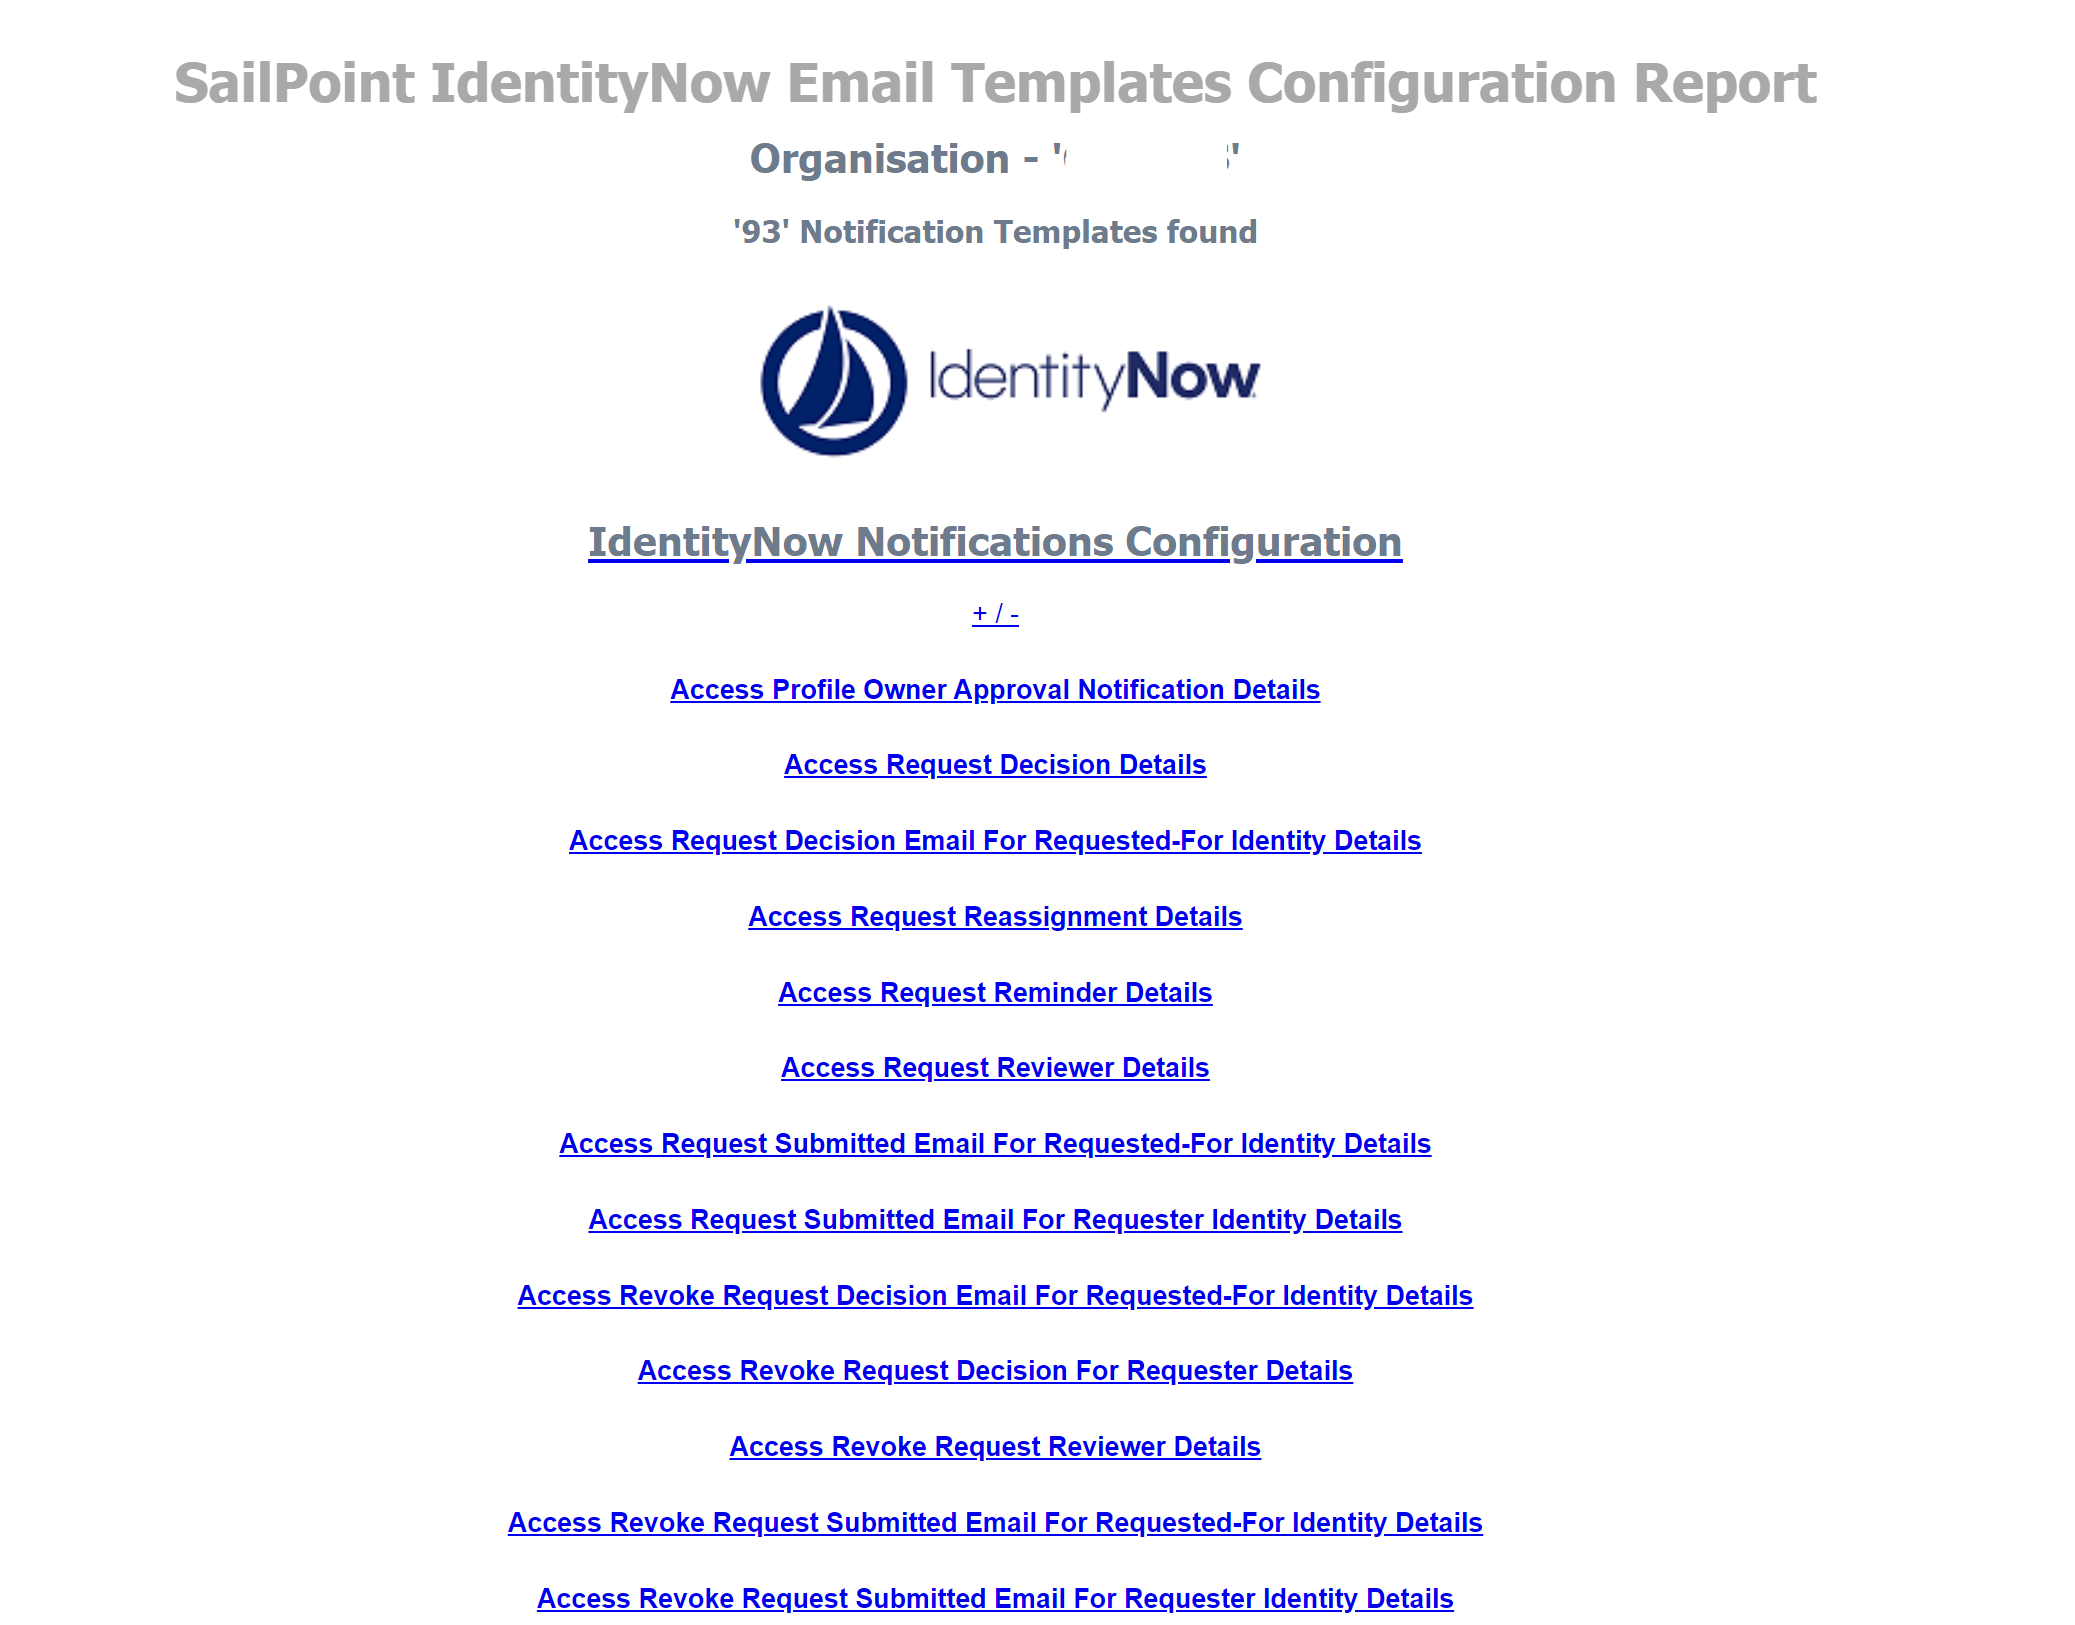 SailPoint IdentityNow Email Template Configuration Report